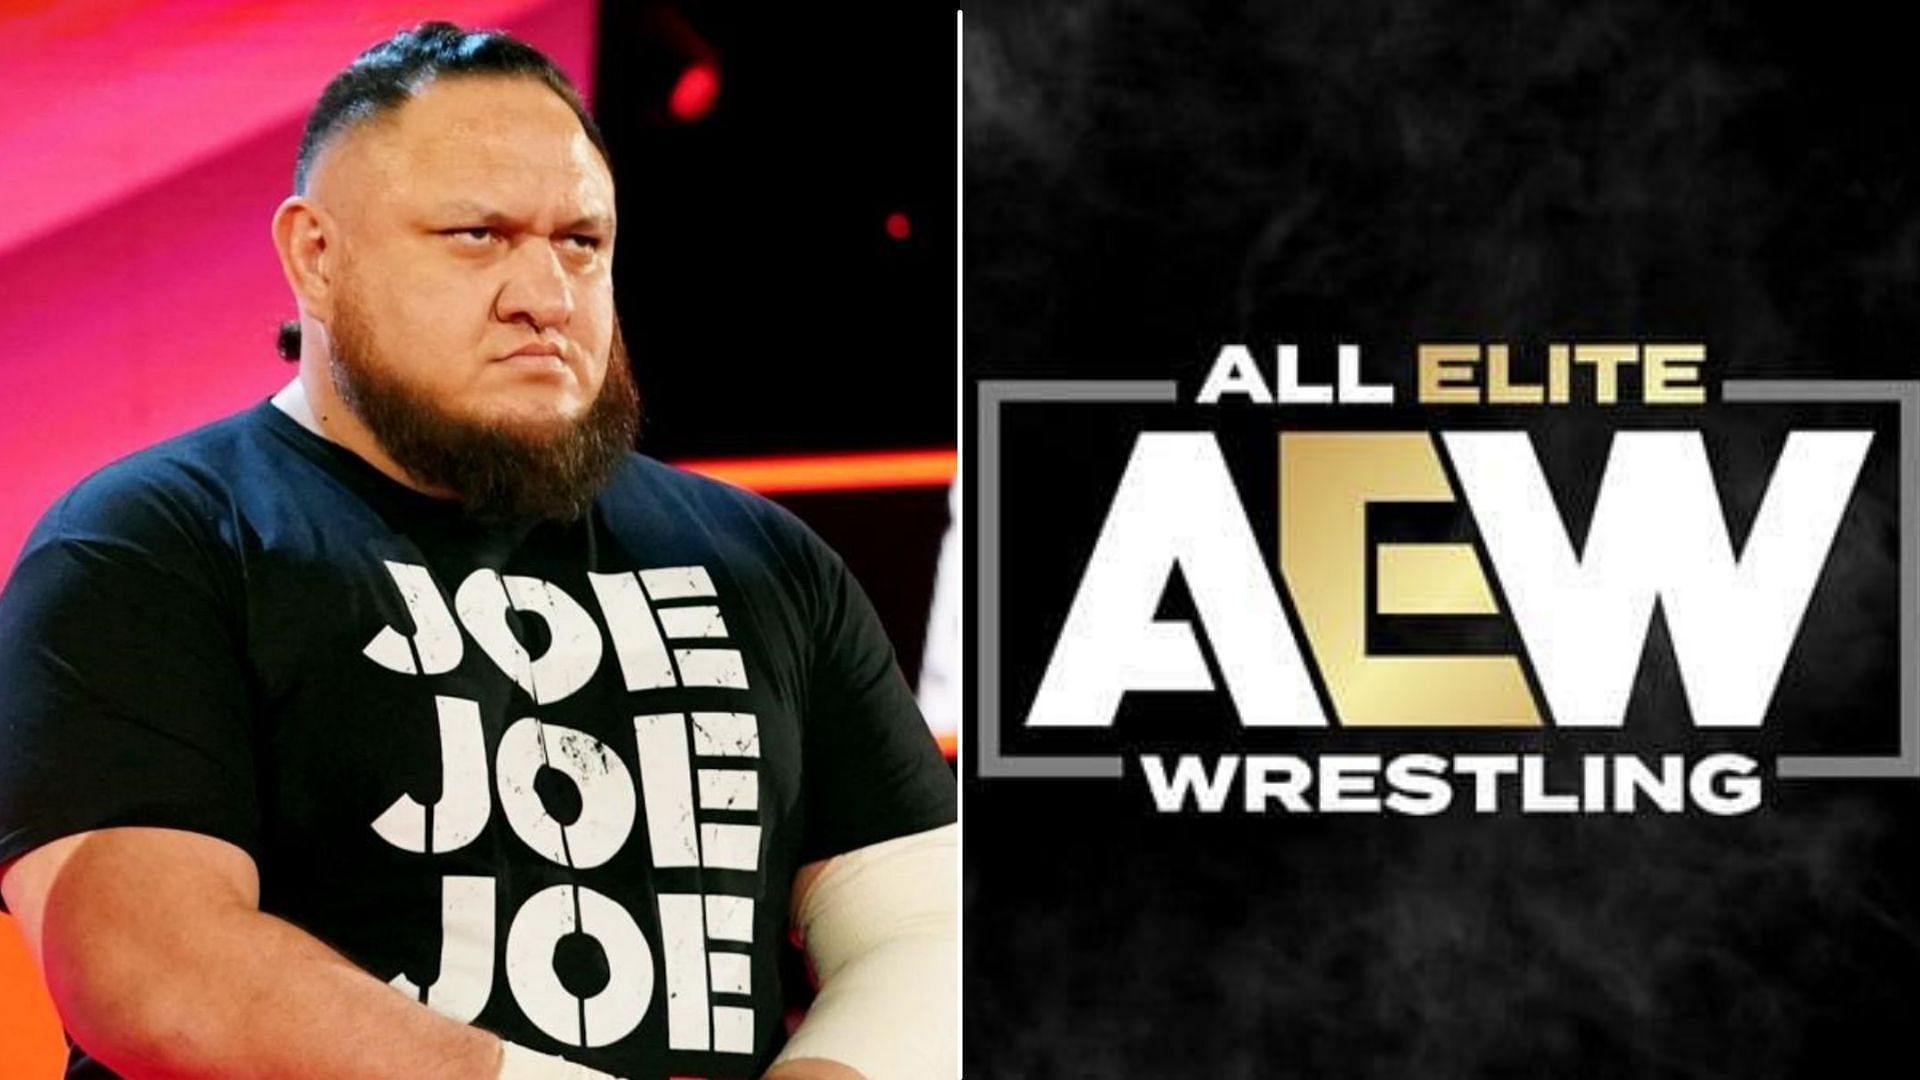 Samoa Joe has a variety of options after leaving WWE, including AEW, but are they the best choice?